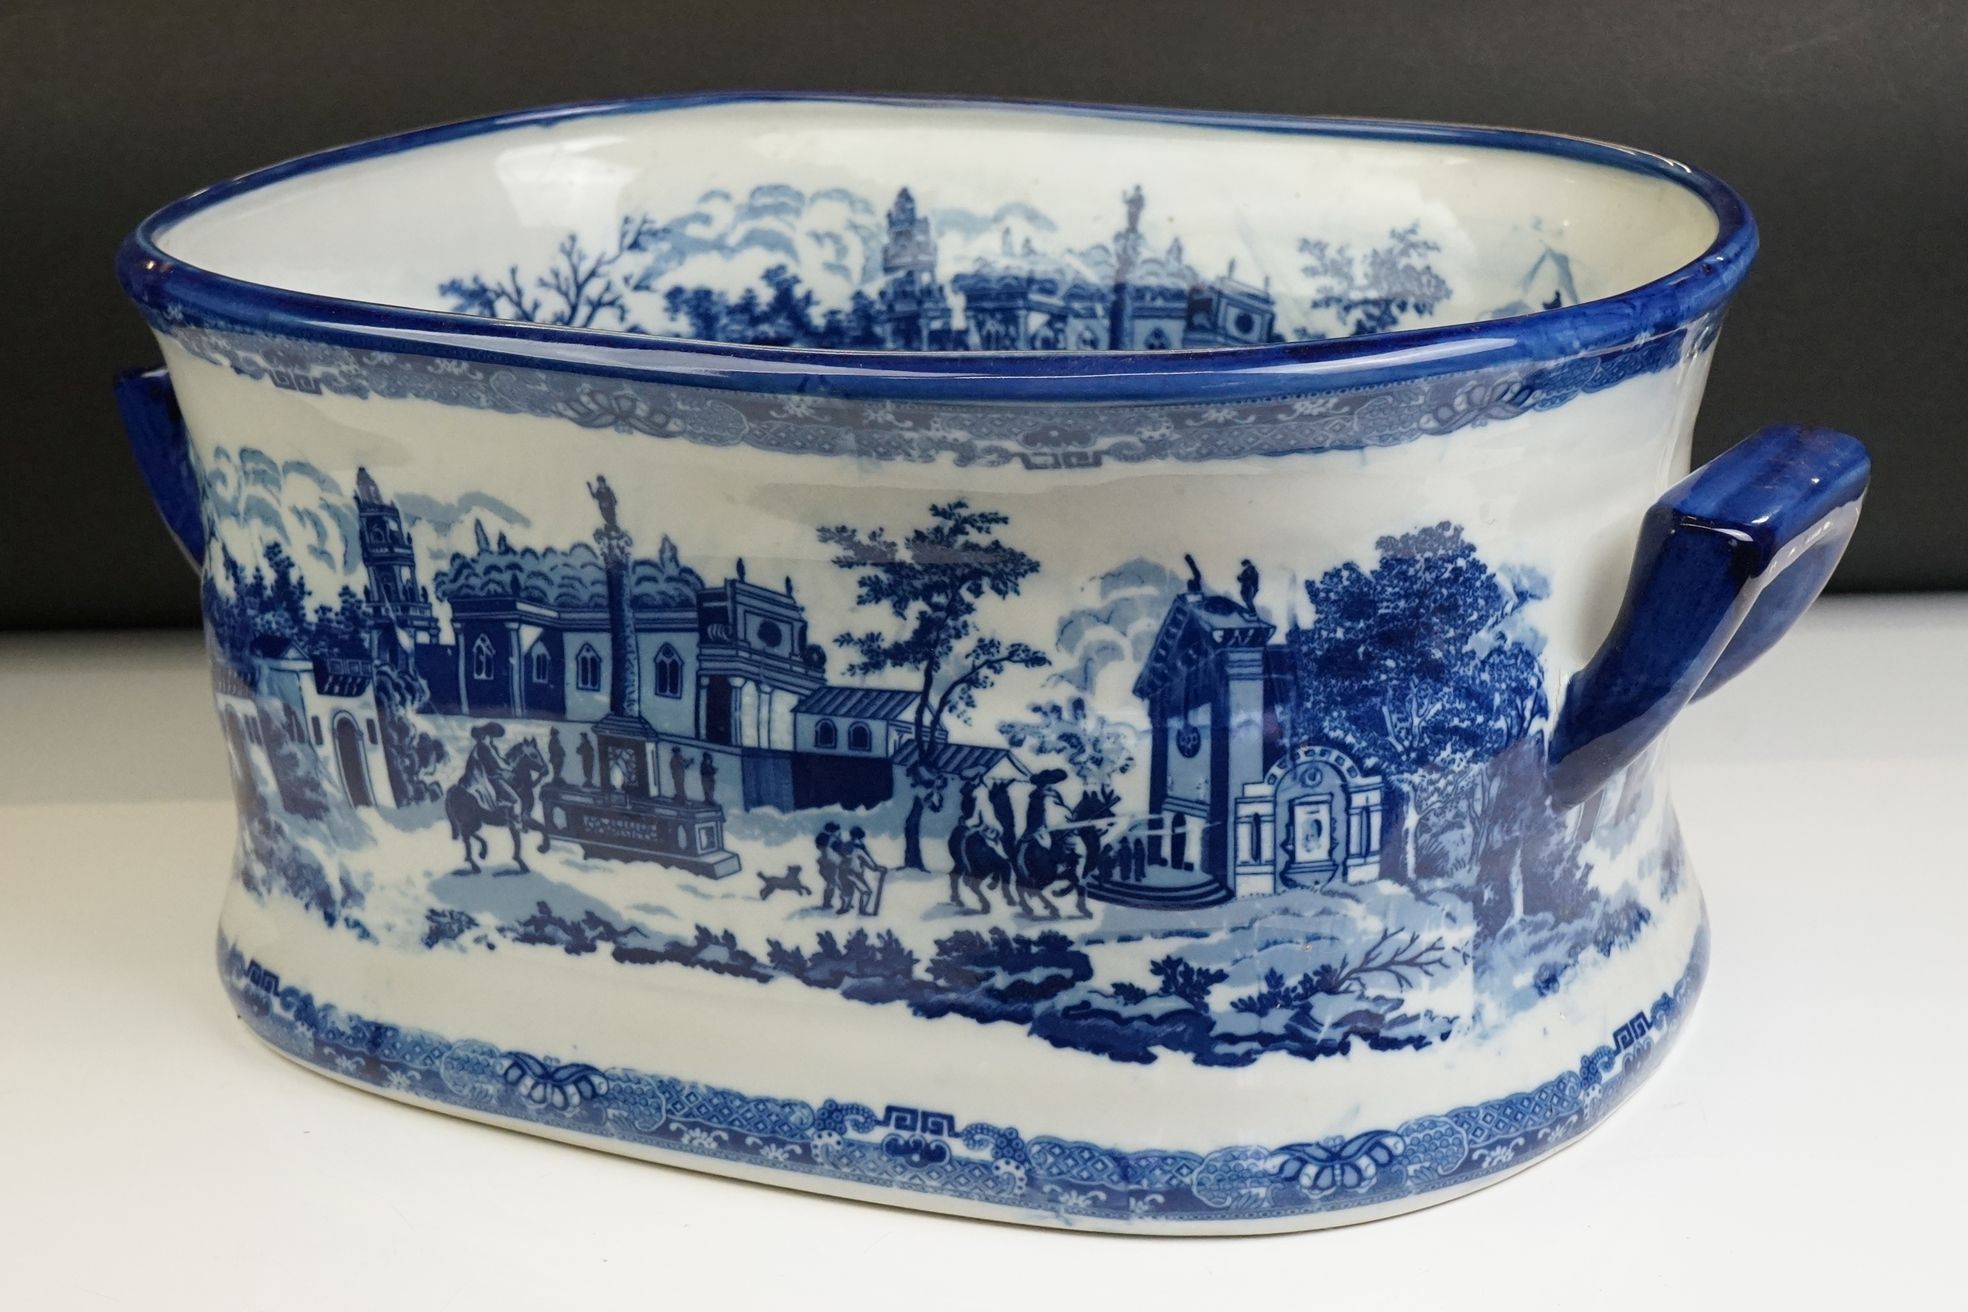 Blue & White Ironstone Foot Bath with typical transfer printed decoration, approximately 47cm wide - Image 8 of 10